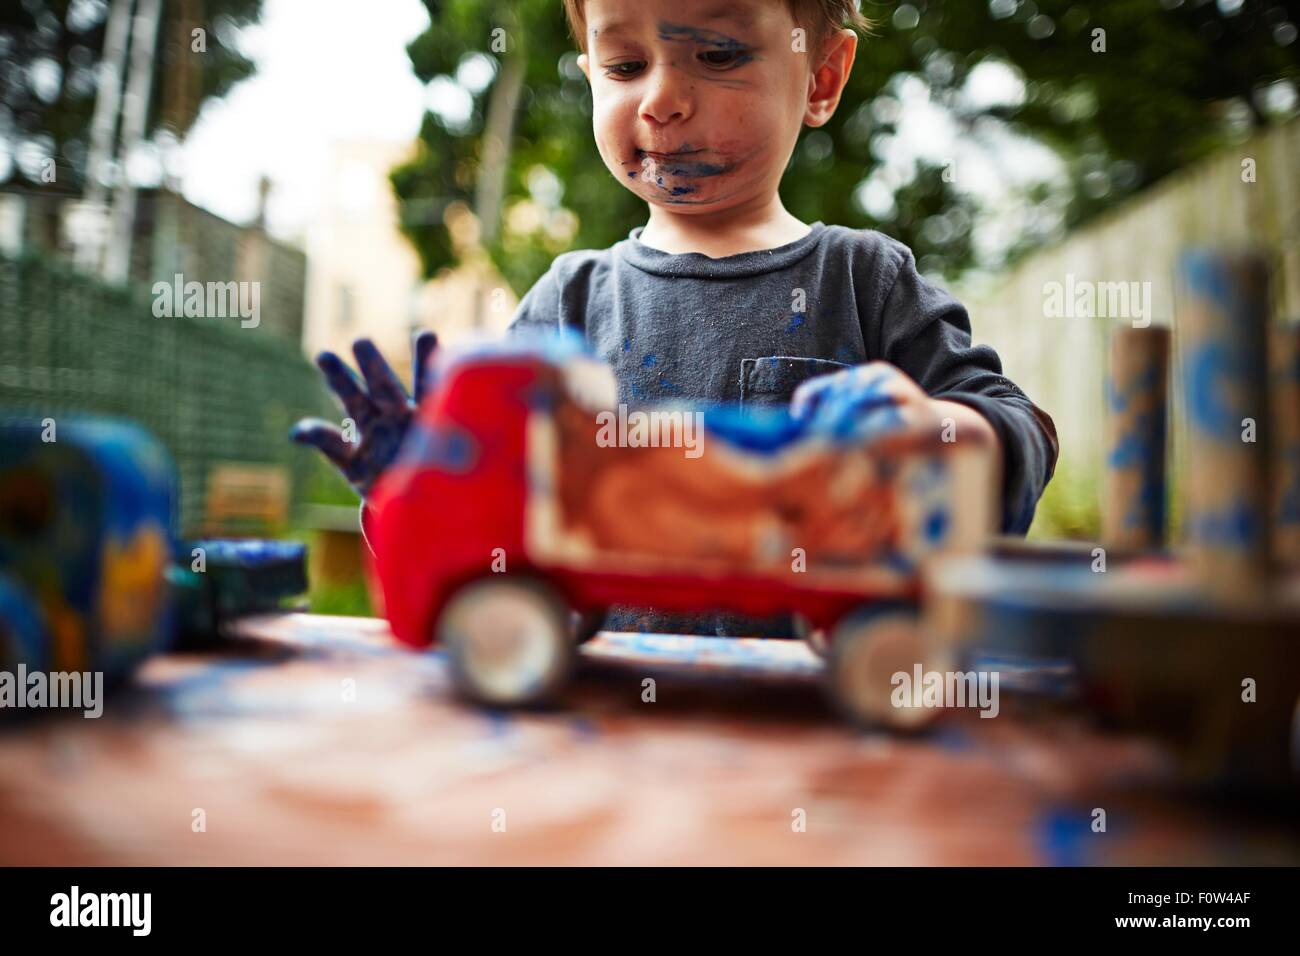 Boy Playing with toy trucks et aquarelle Banque D'Images